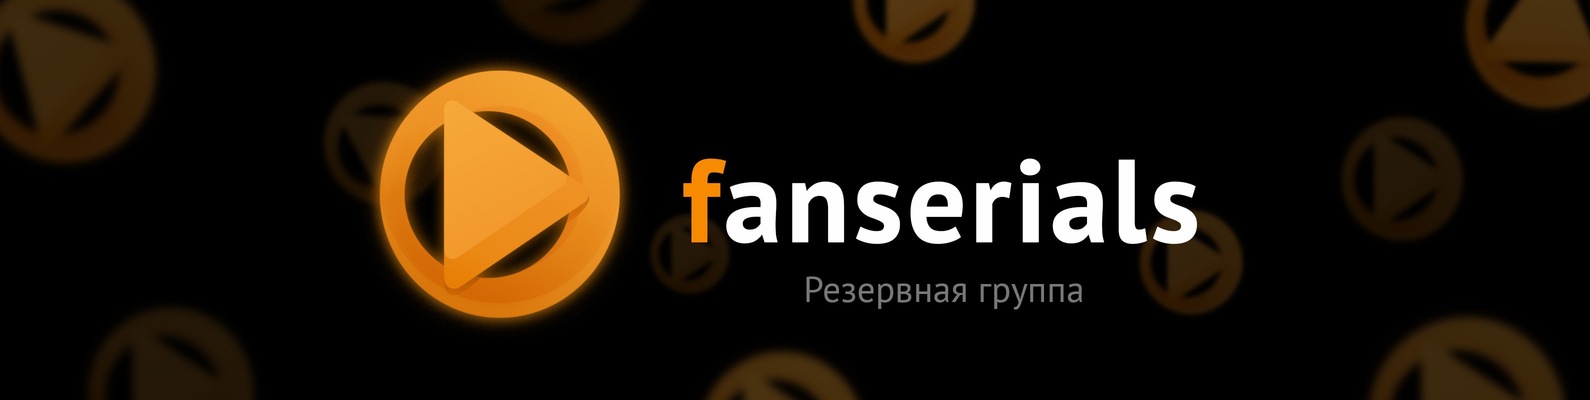 Fanserials Android